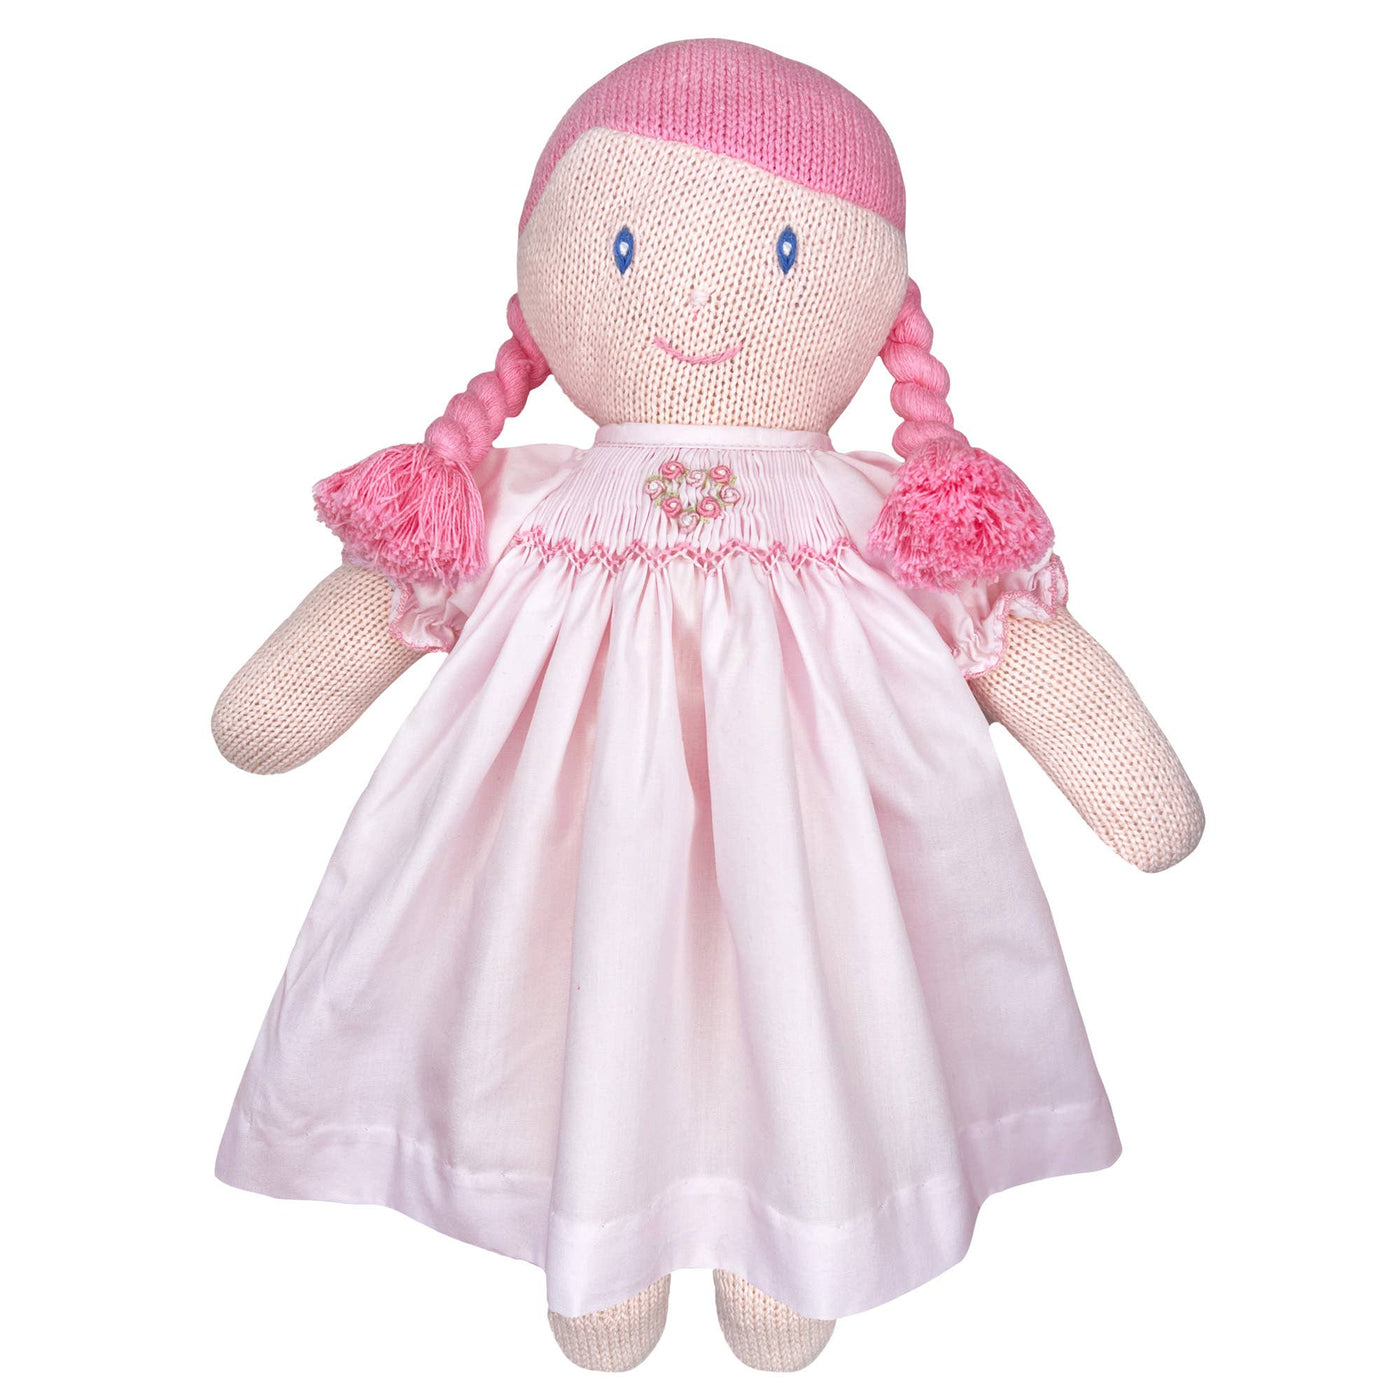 Petit Ami & Zubels - Knit Girl Doll with Pink Smocked Dress